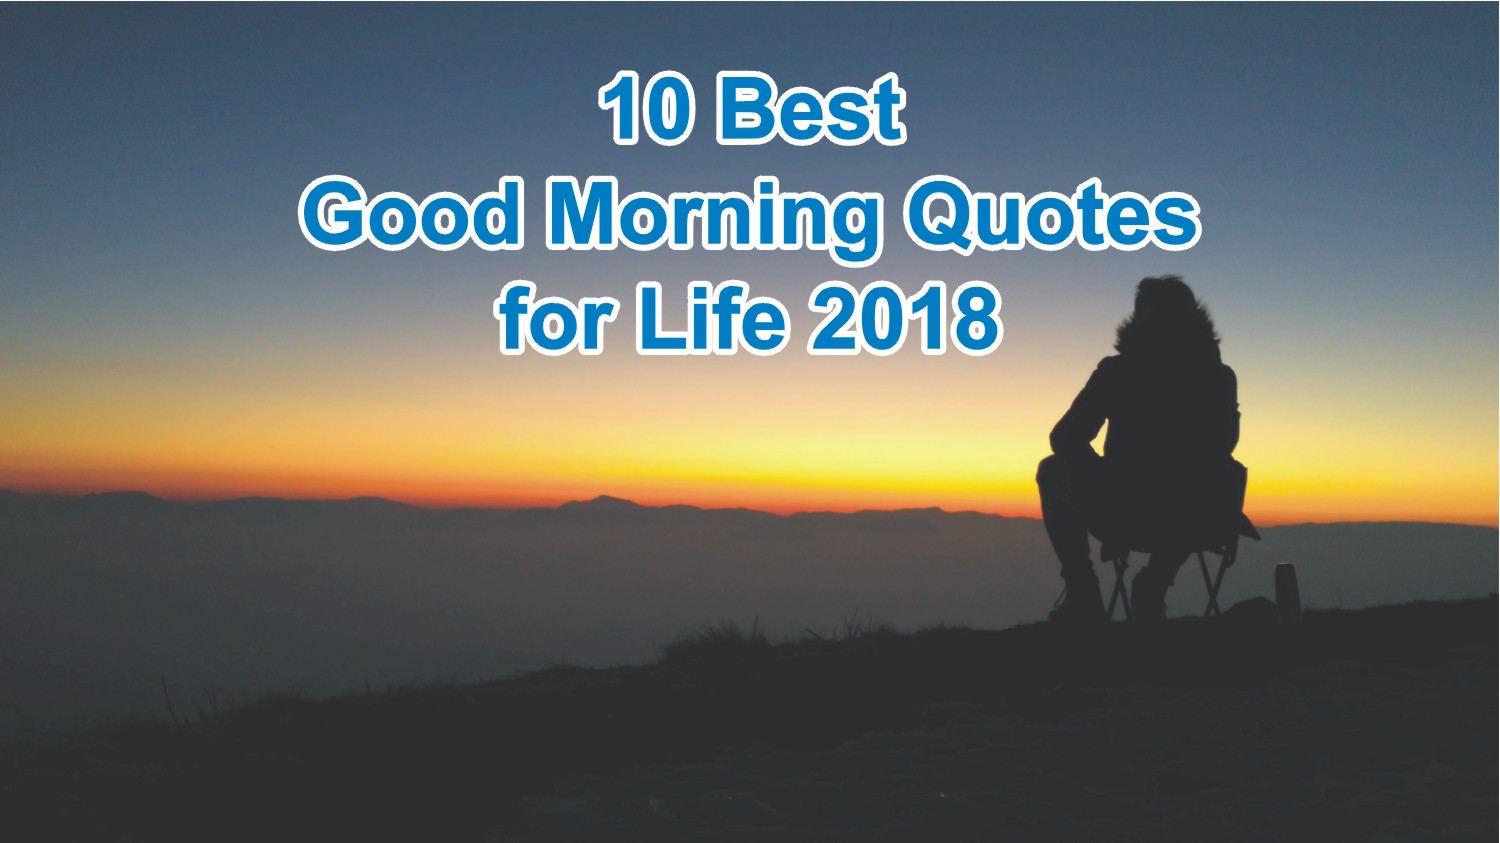 10 Best Good Morning Quotes for Life with beautiful images 2019